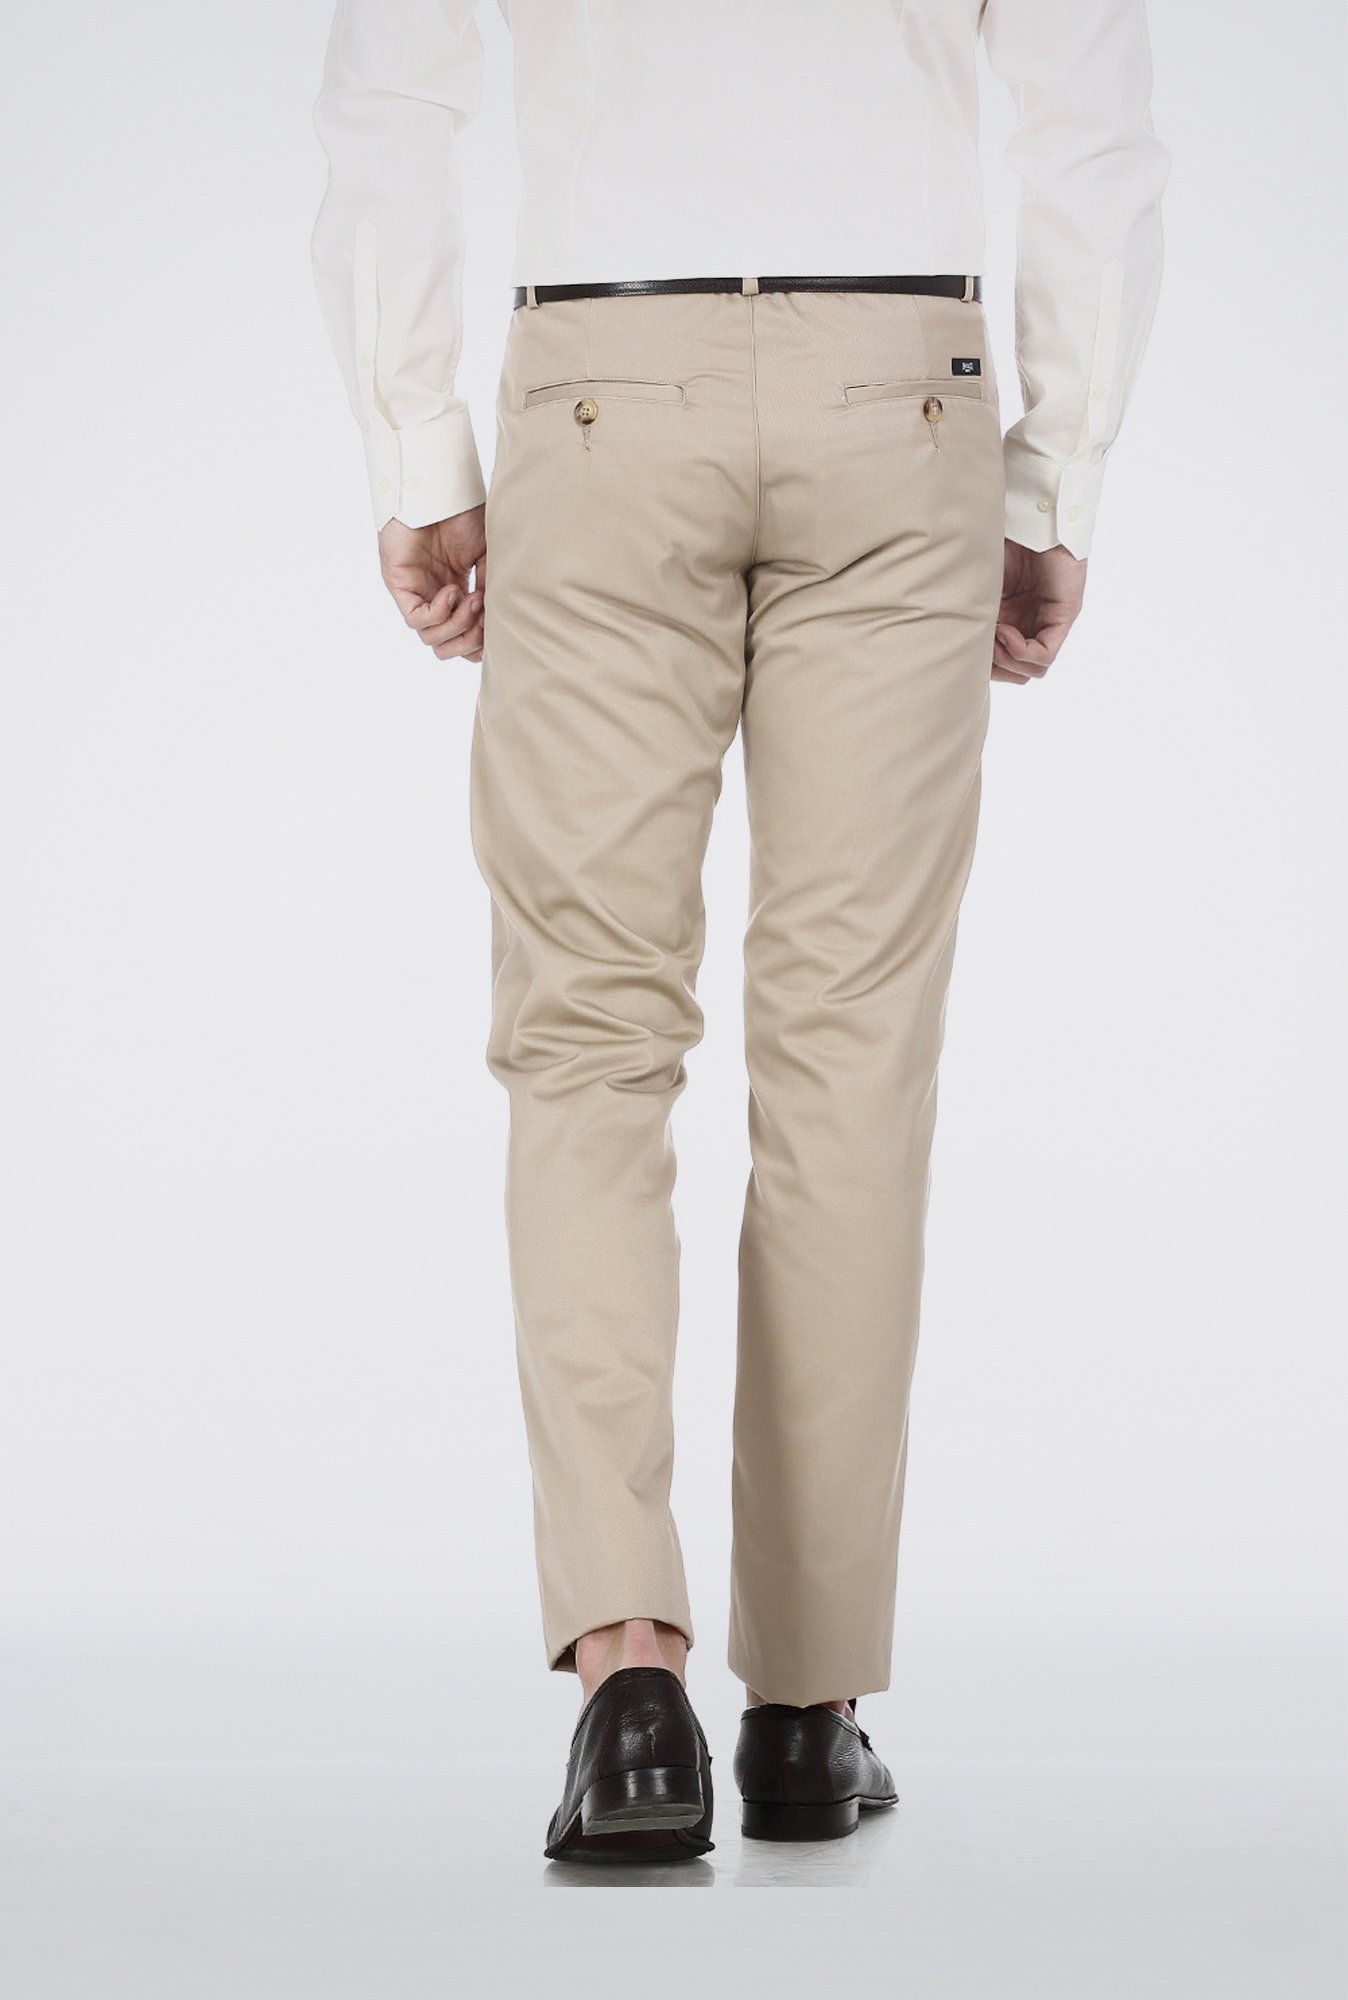 MENS OLIVE SOLID JASON FIT TROUSER  JDC Store Online Shopping